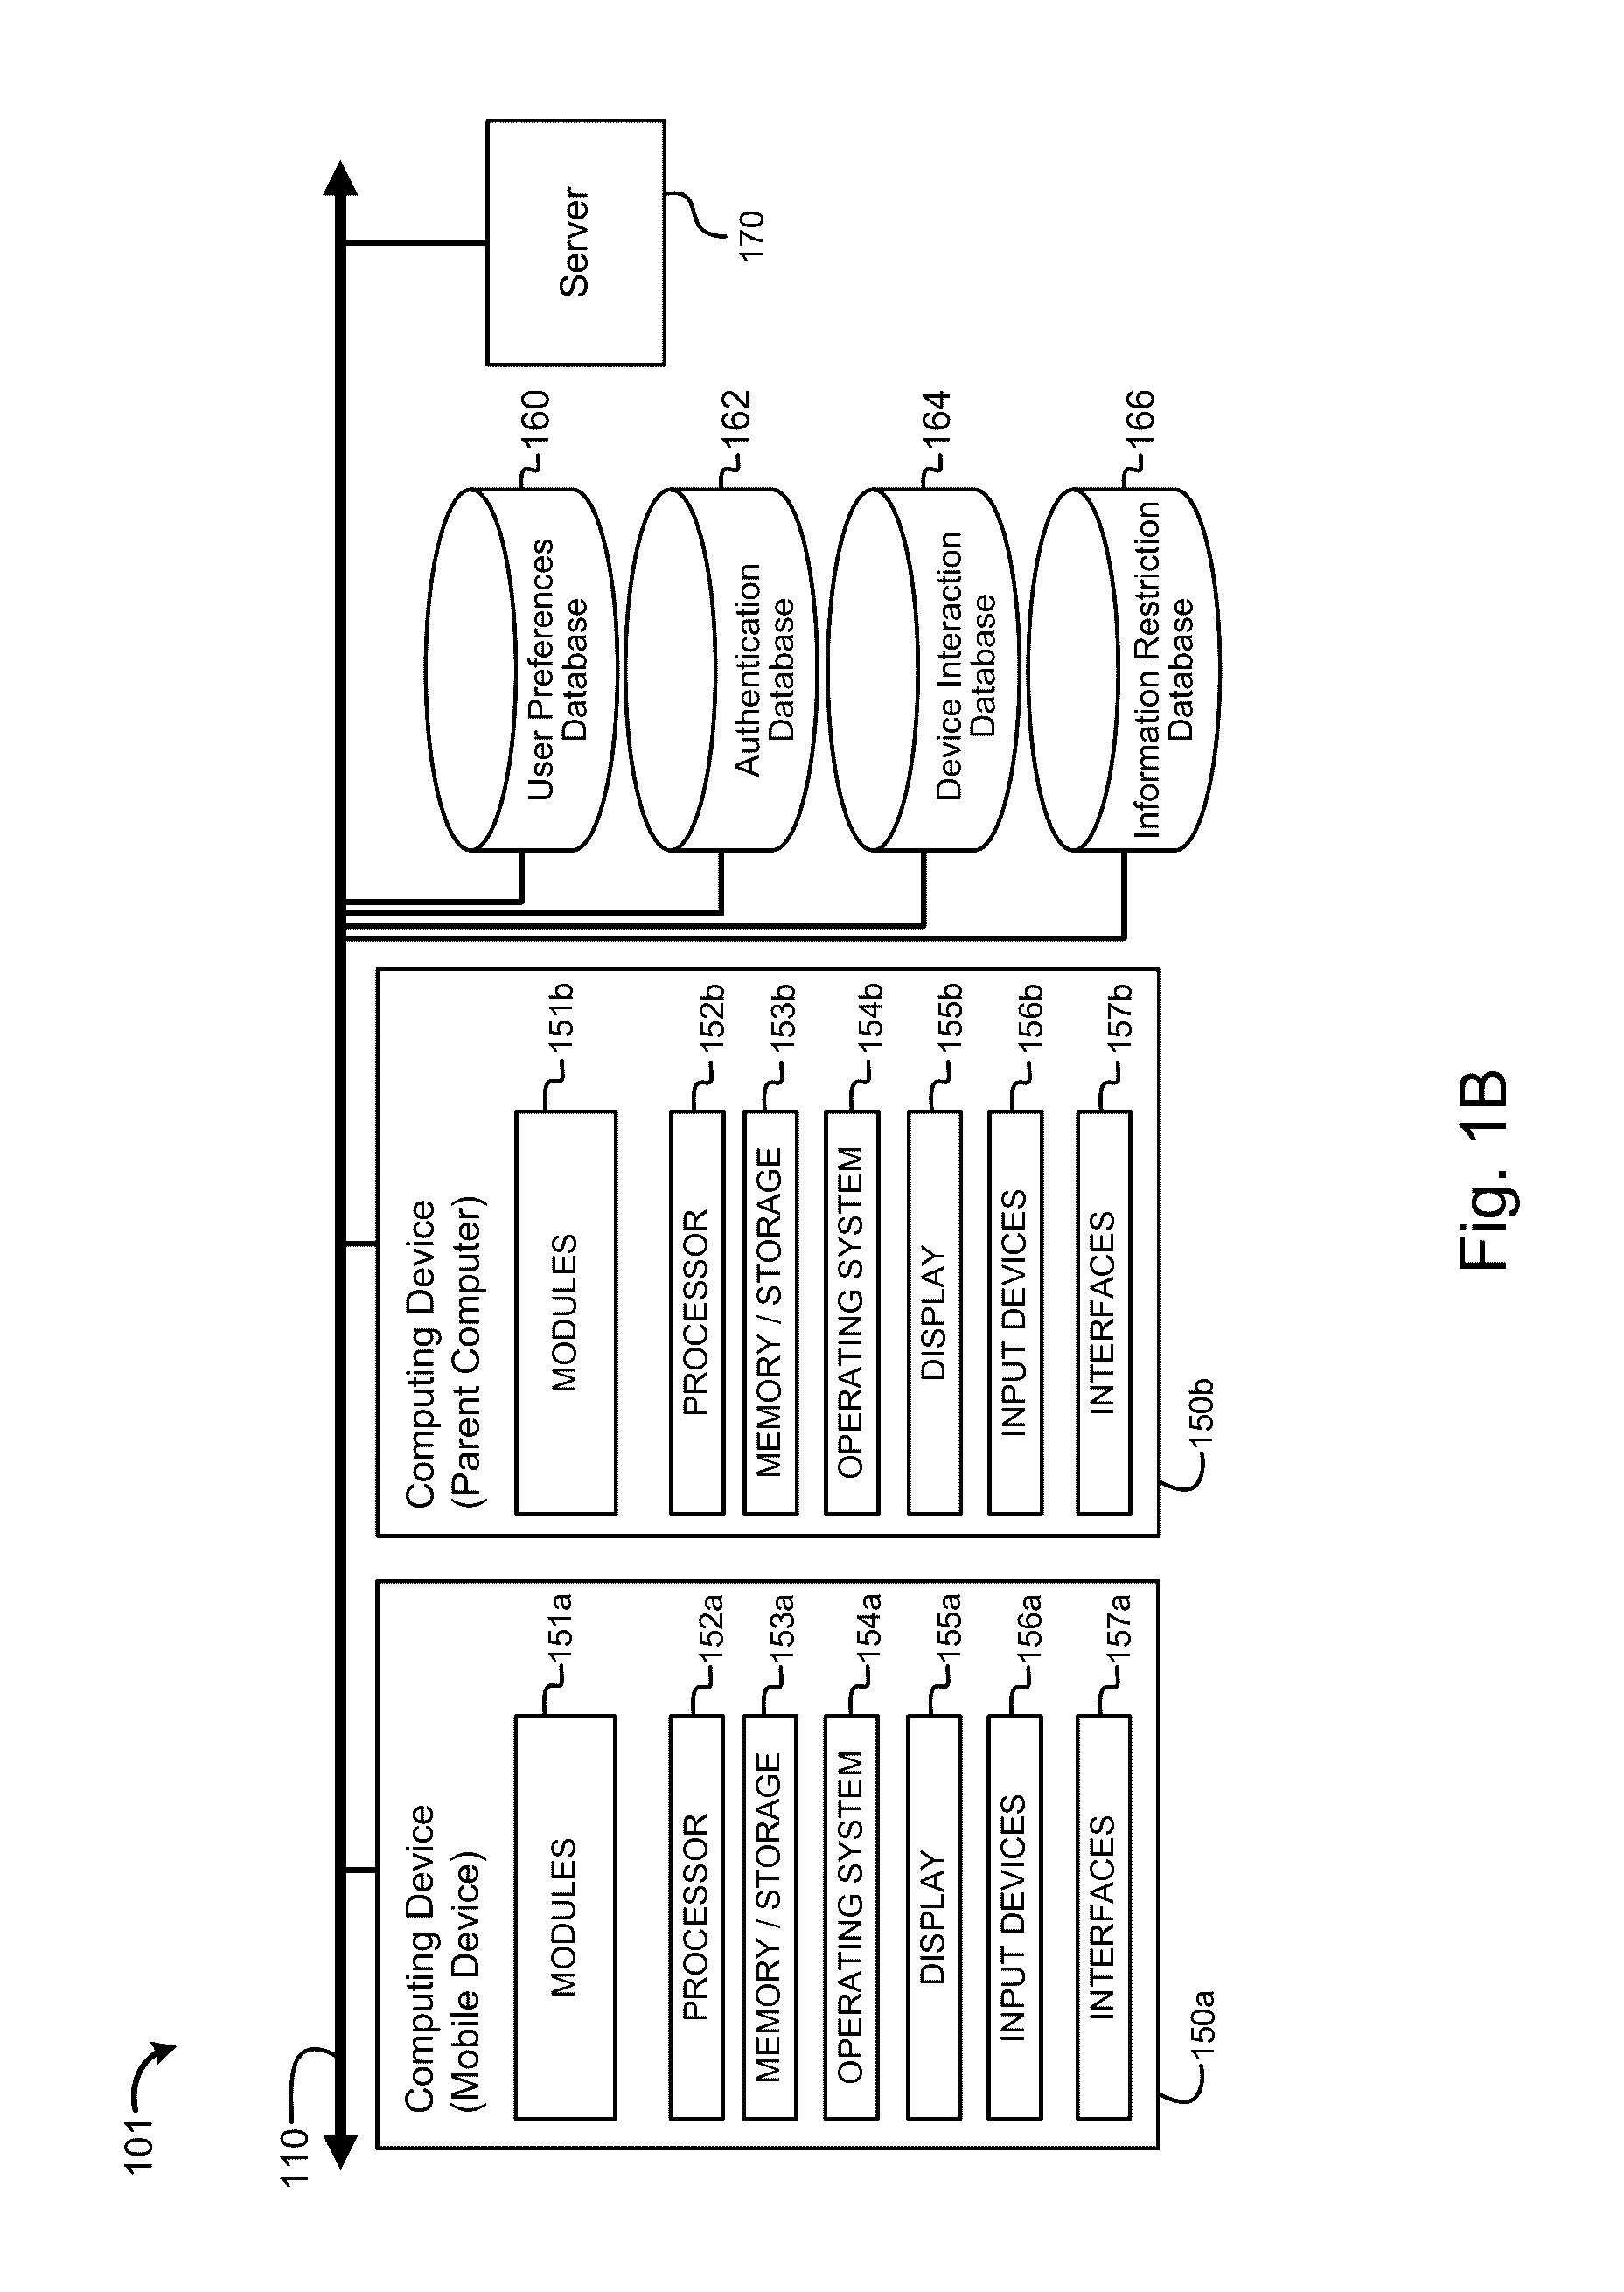 System and method for the display of restricted information on private displays